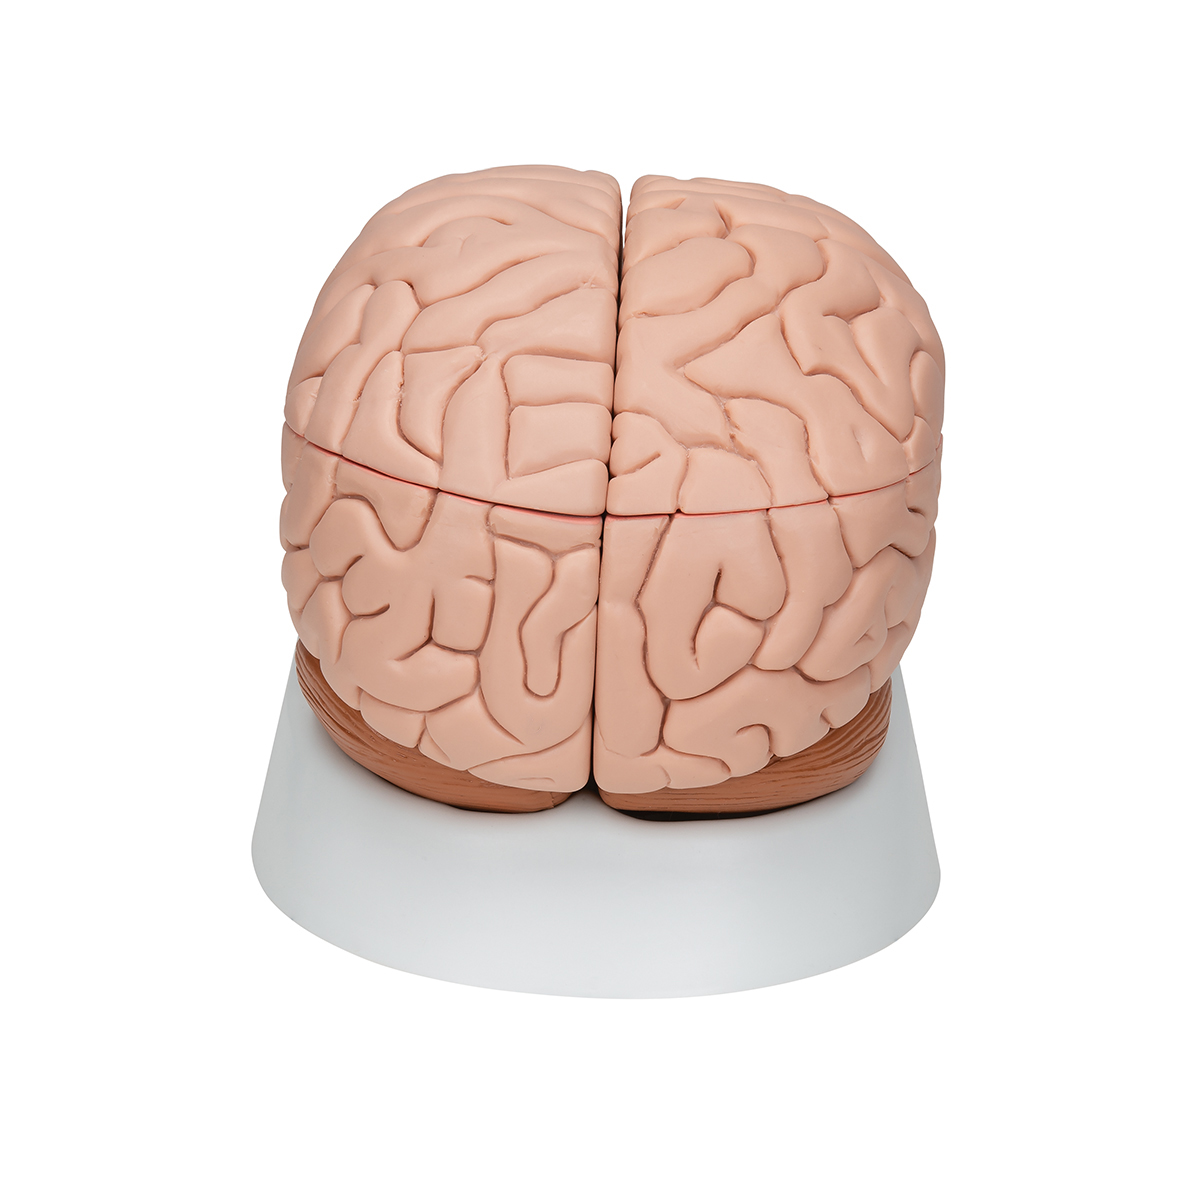 American Educational 7-1414 Eight-Piece Human Brain Model Plastic Includes Base Life-Size 